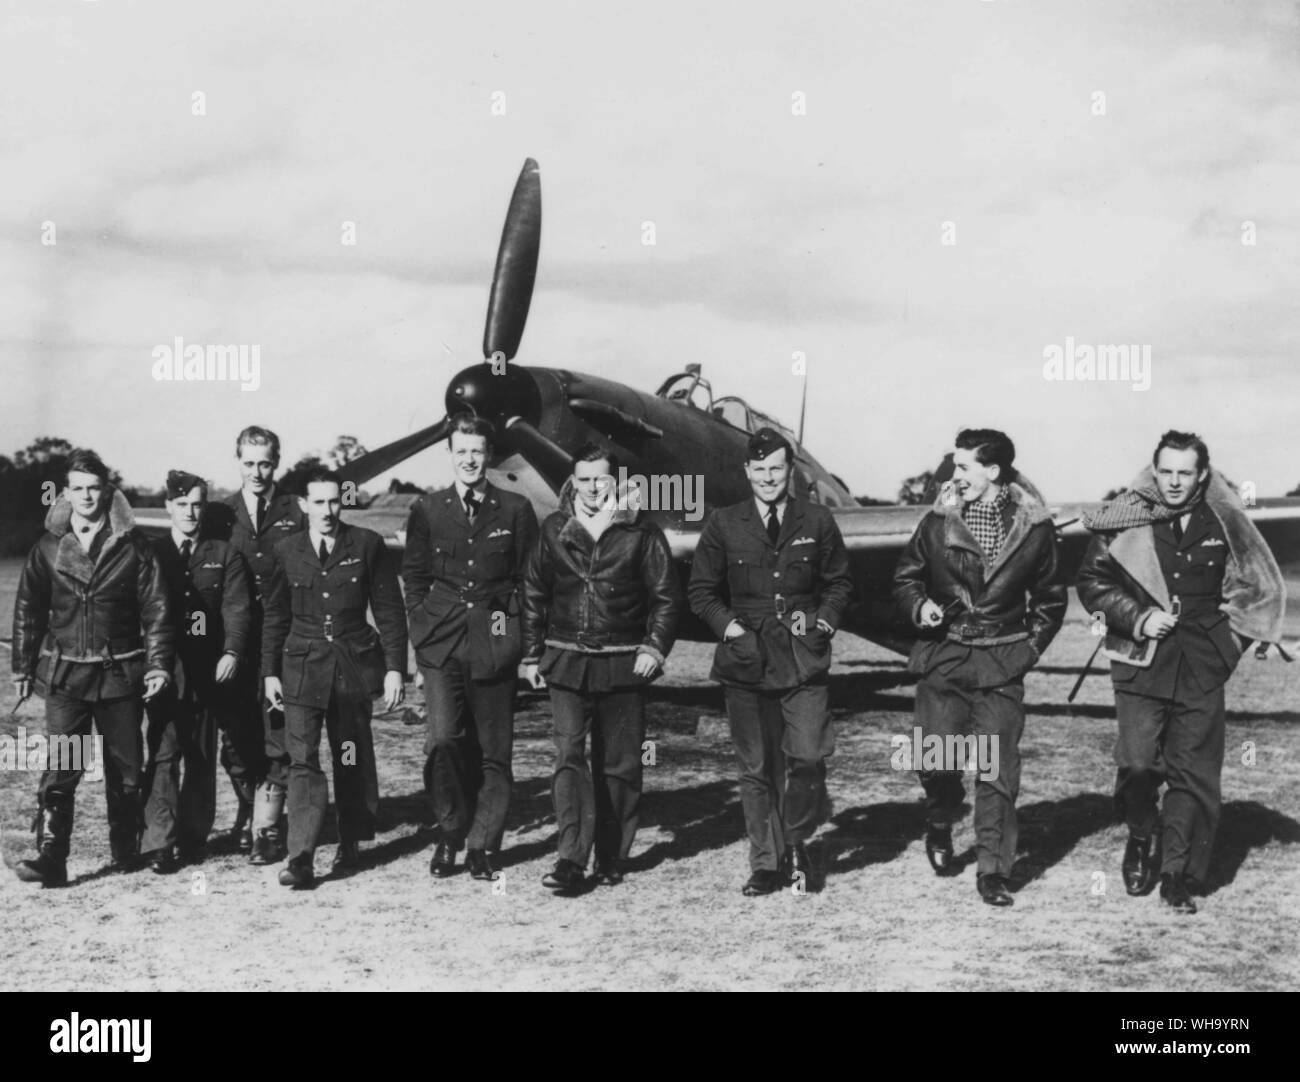 WW2: RAF fighter pilots with Spitfire in the background. Stock Photo